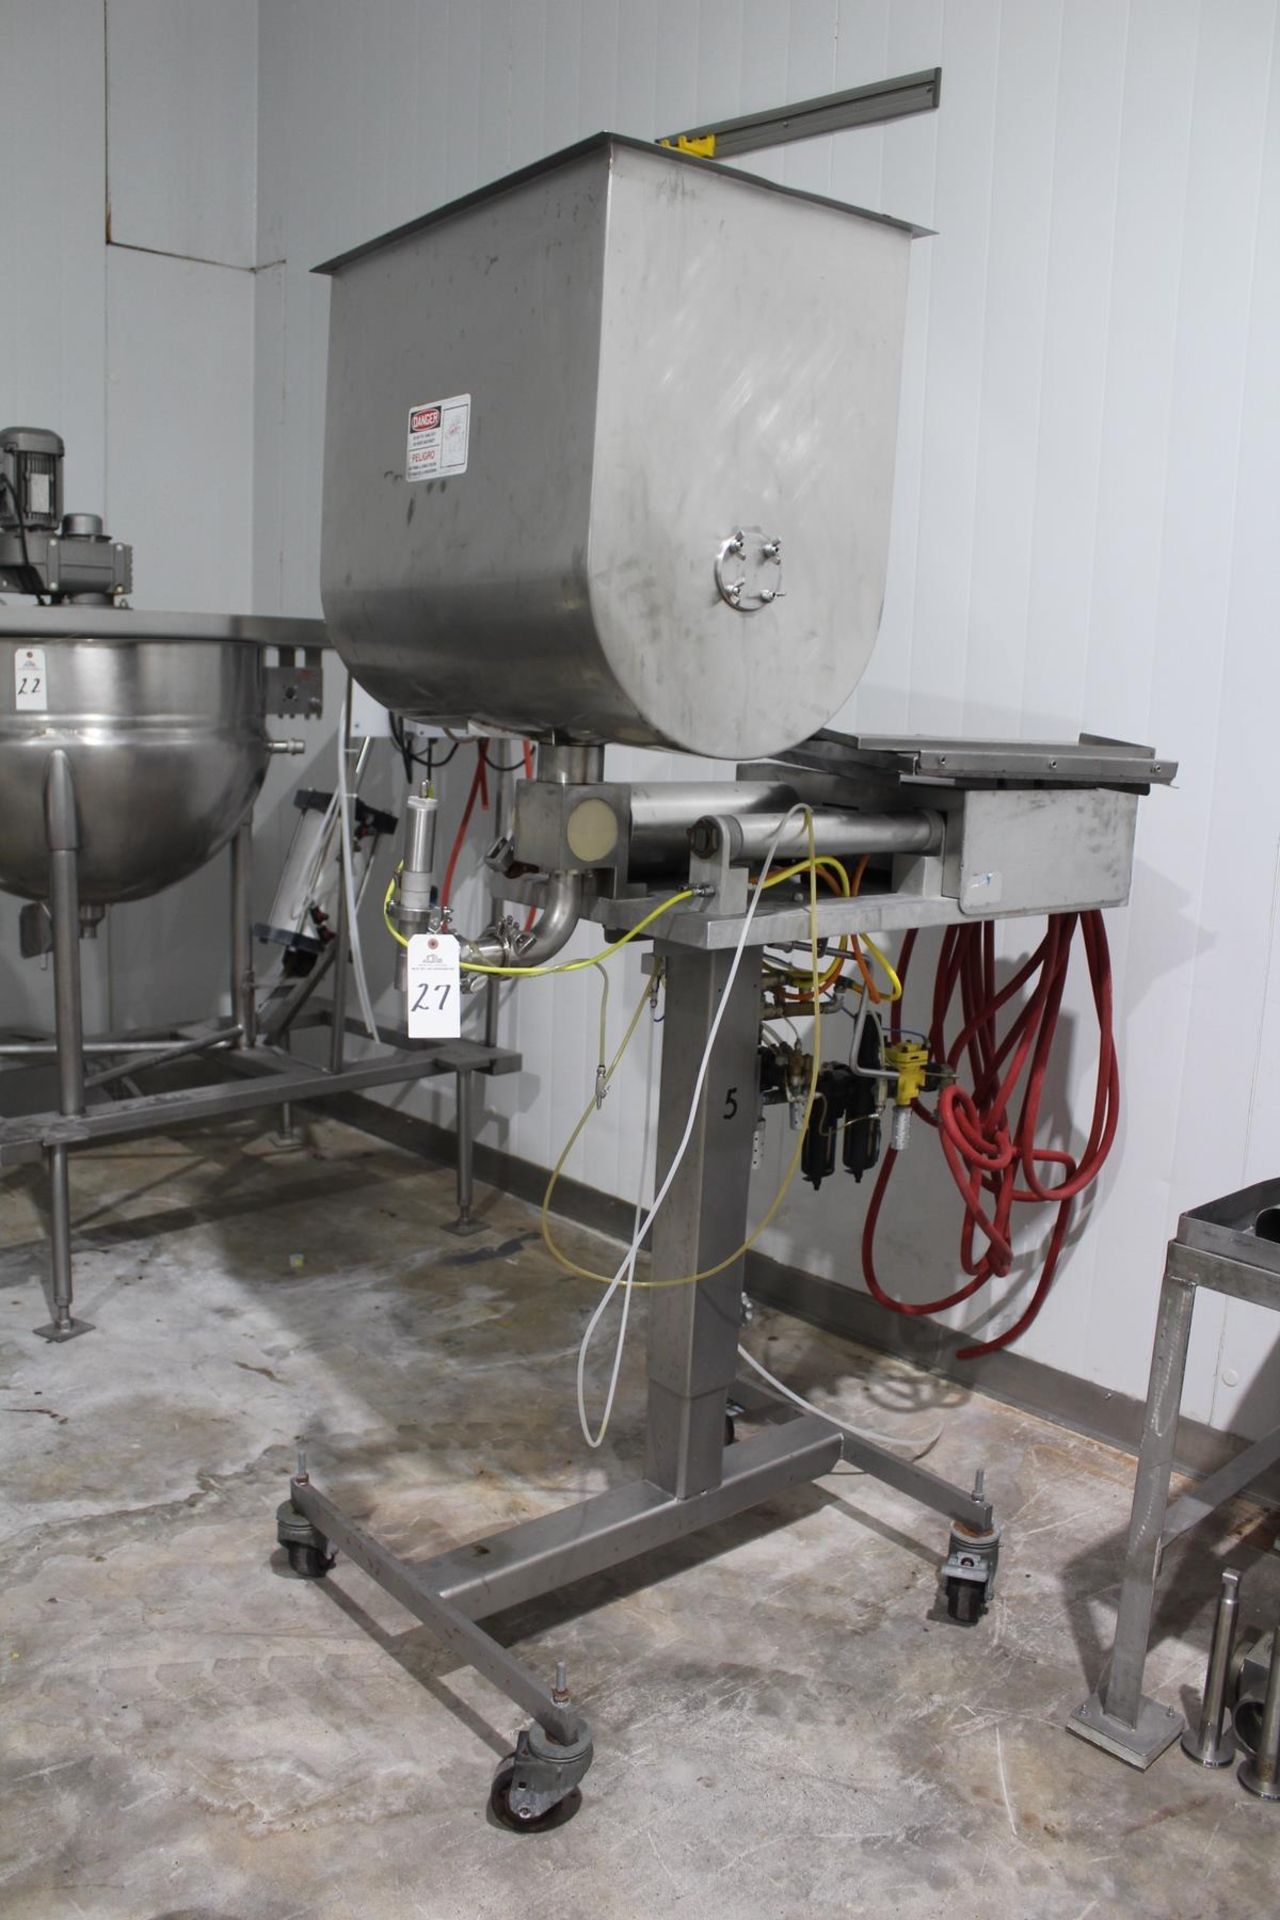 Hinds-Bock Piston Filler, M# SP-160, S/N 5610, W/ Agitated Feed Hopper | Rig Fee: $100